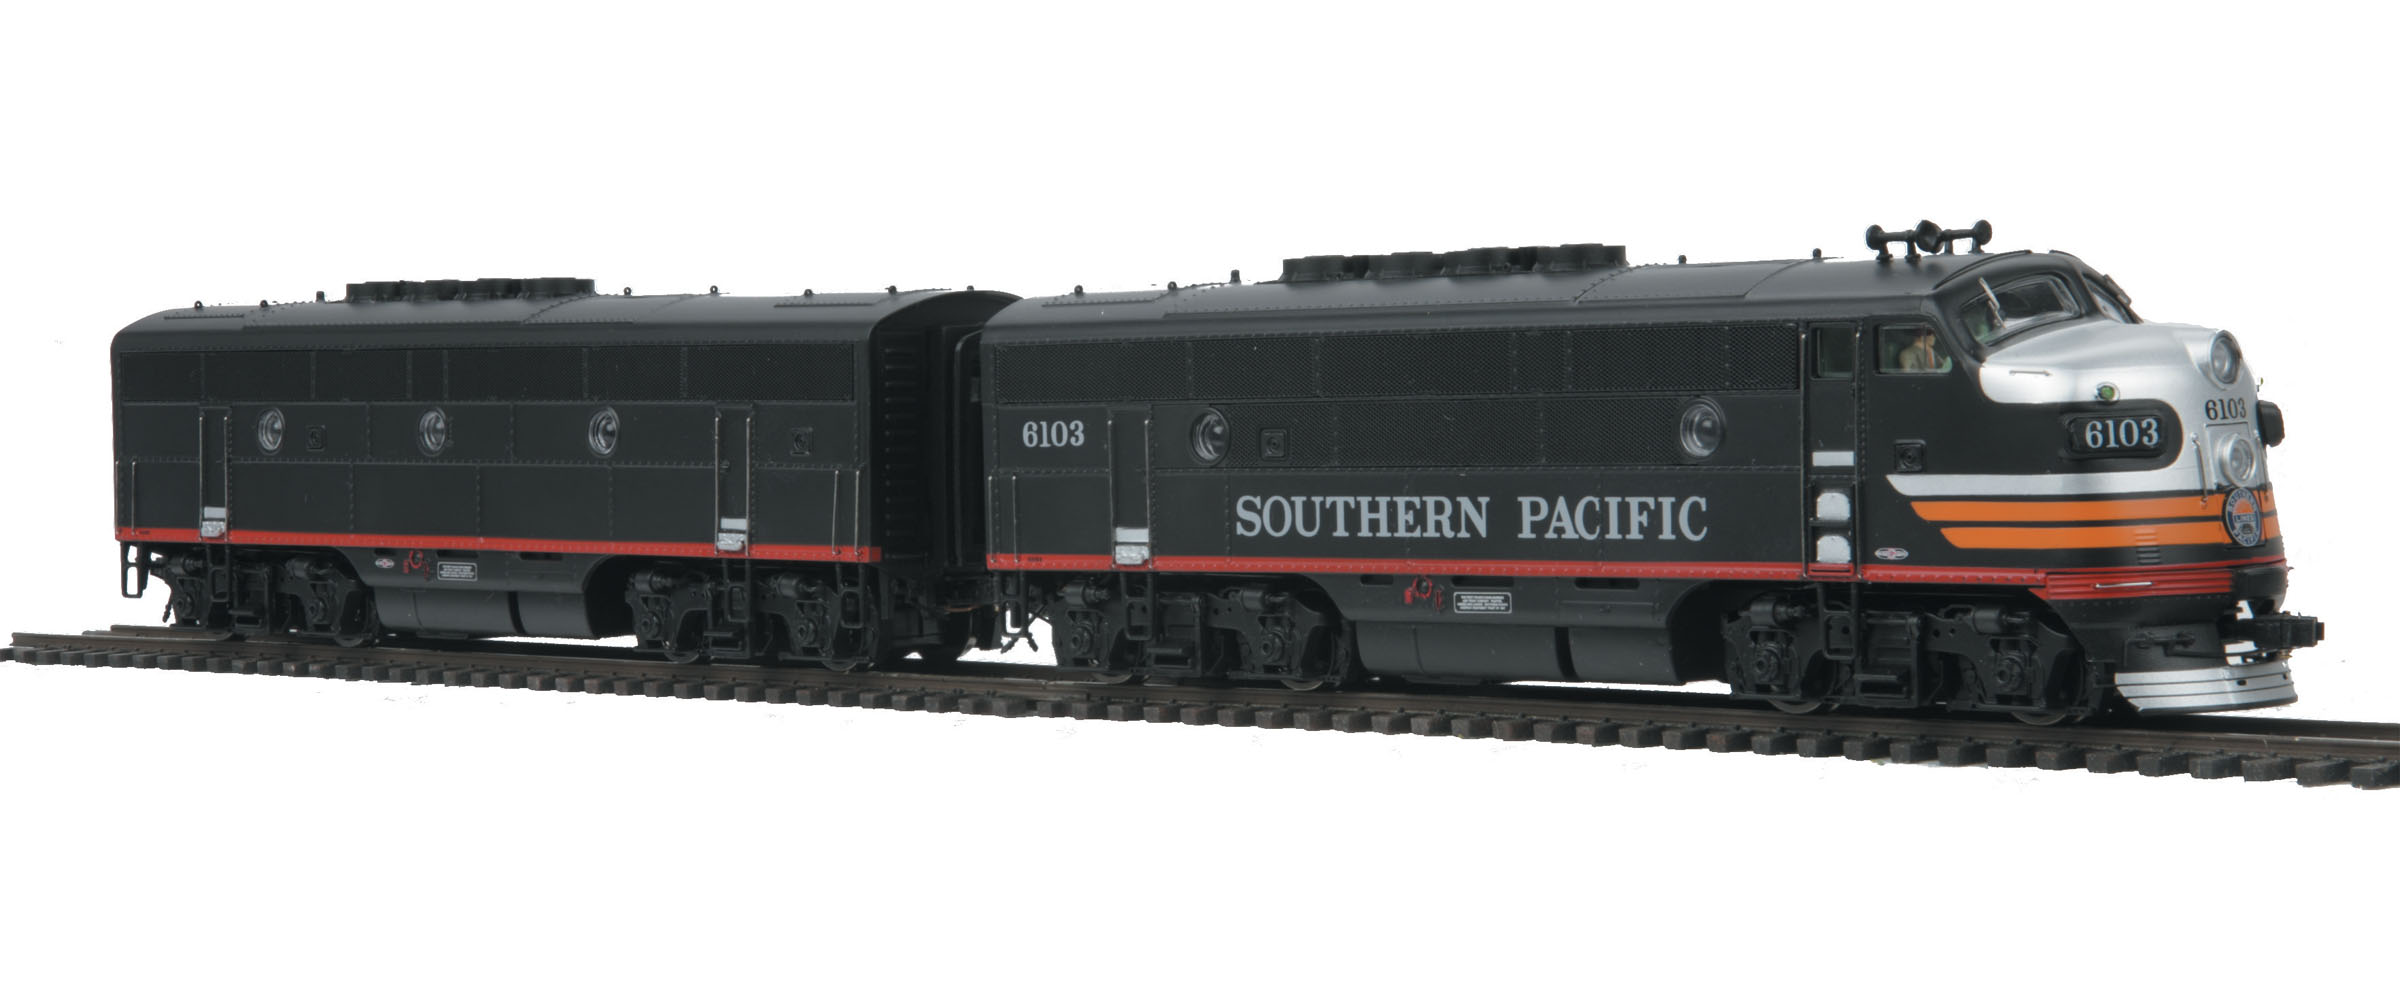 Mth Electric Trains Mth Ho | Autos Post